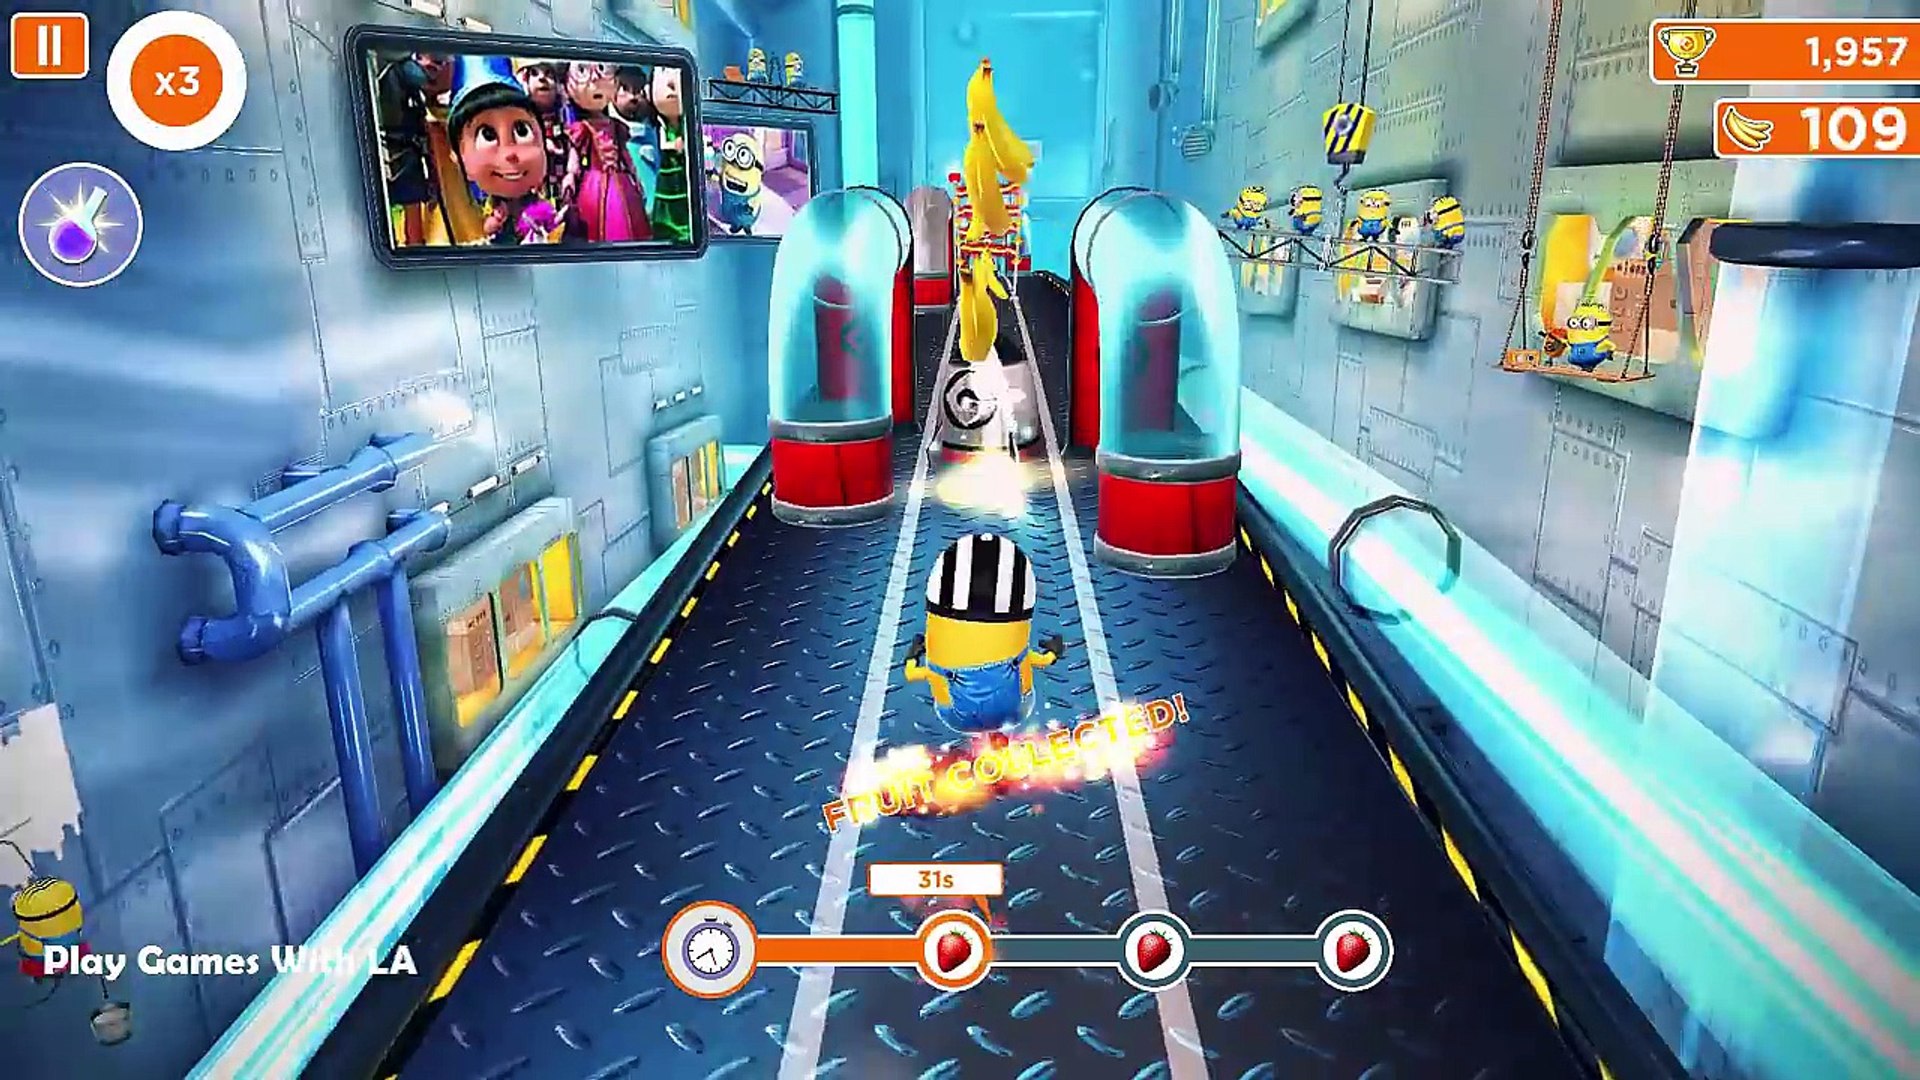 Despicable Me 2 Minion Rush Starfish Minion Solo Running and Flying